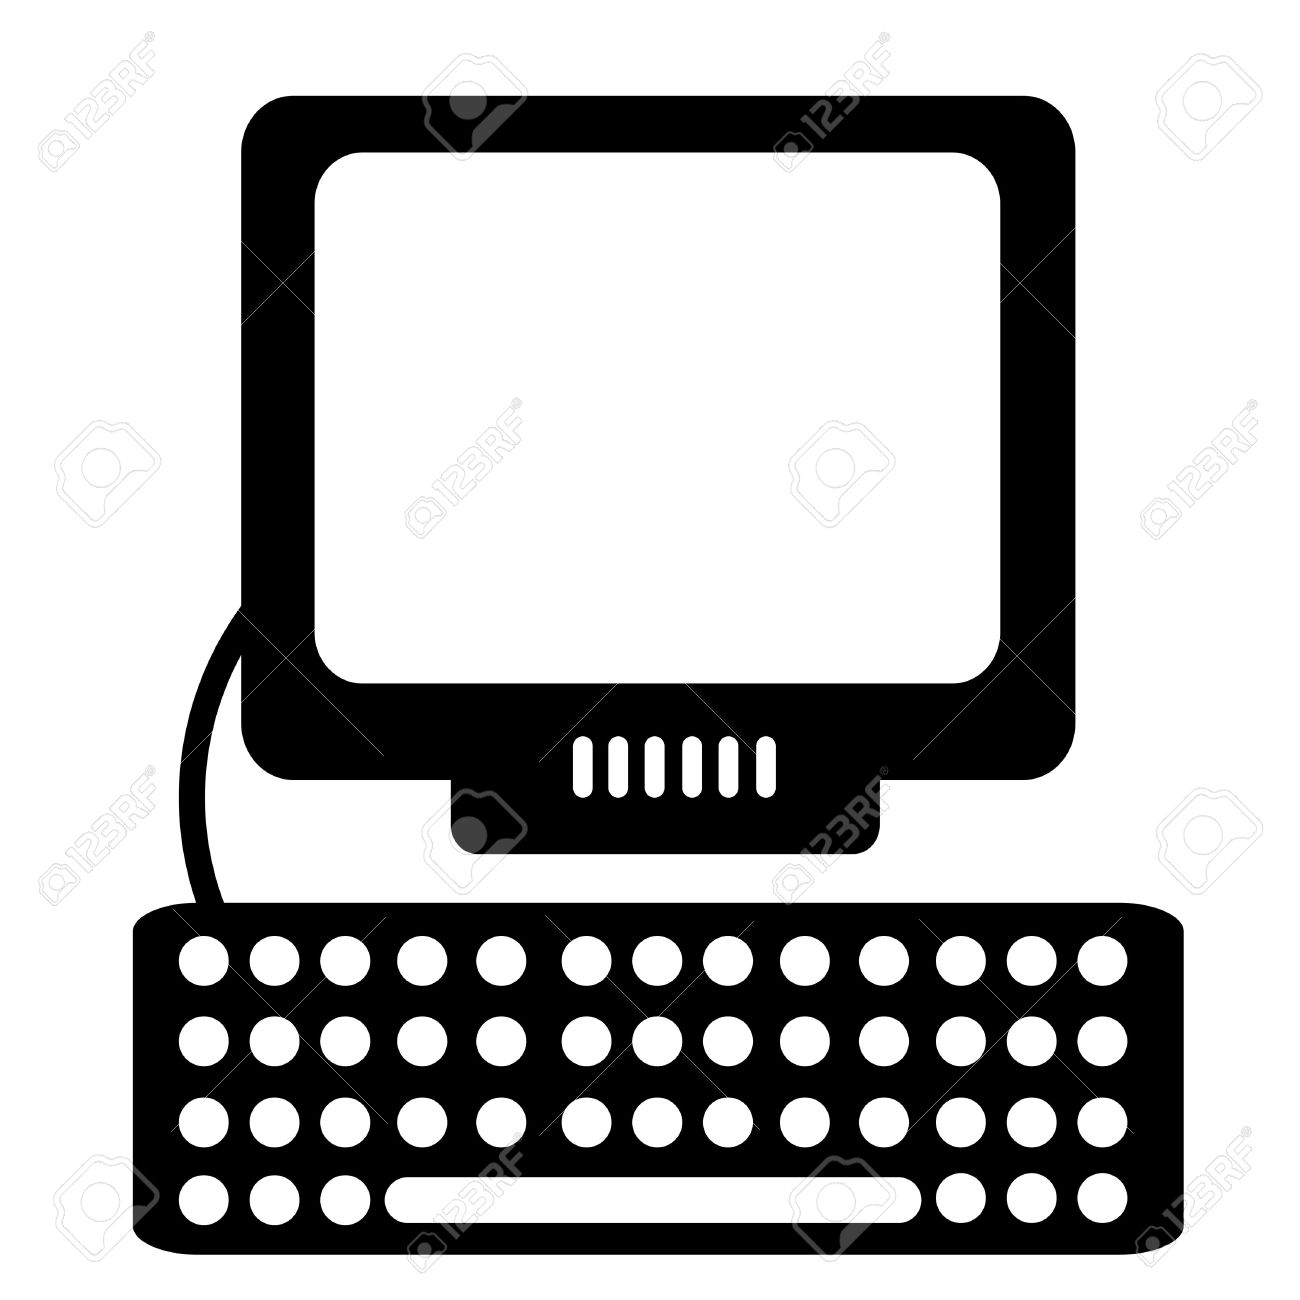 Computer black and white computer clipart black and white